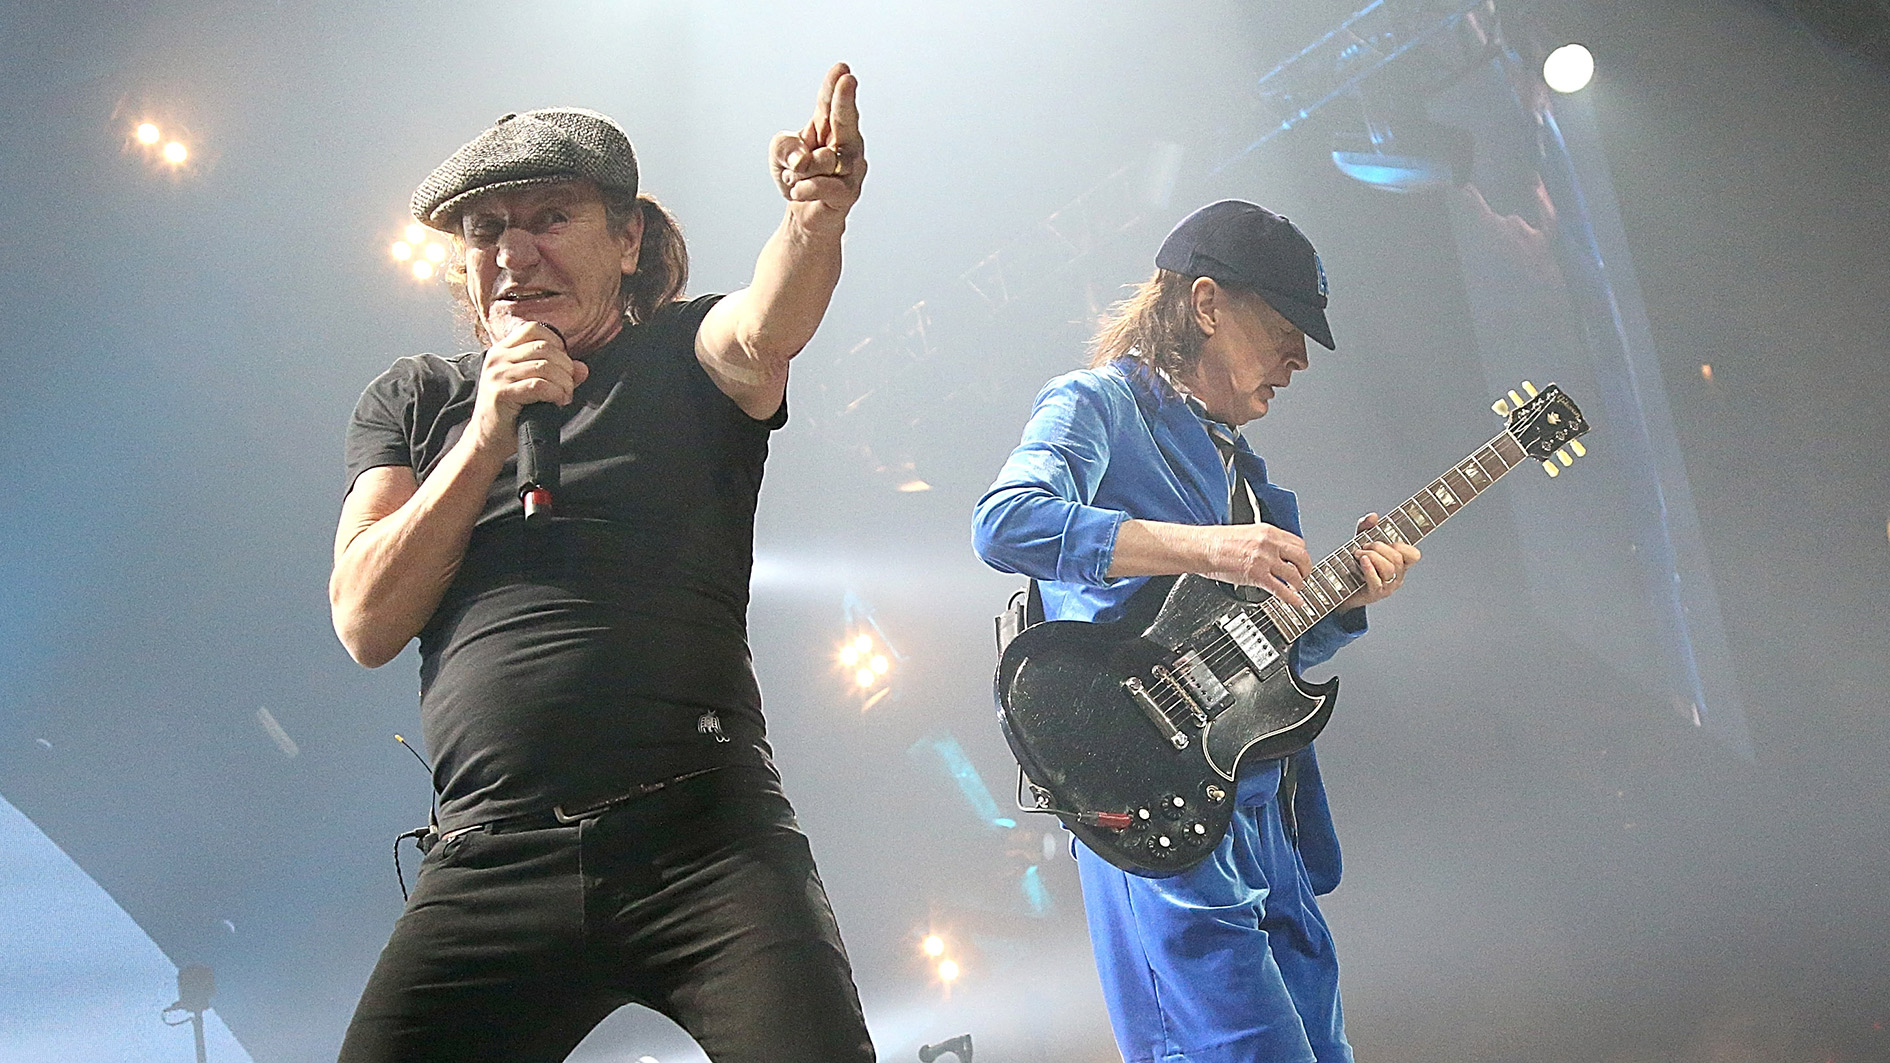 Skråstreg spiller Ironisk Brian Johnson “told not to” answer questions about the future of AC/DC, as  it's the band's “official line” | Guitar World